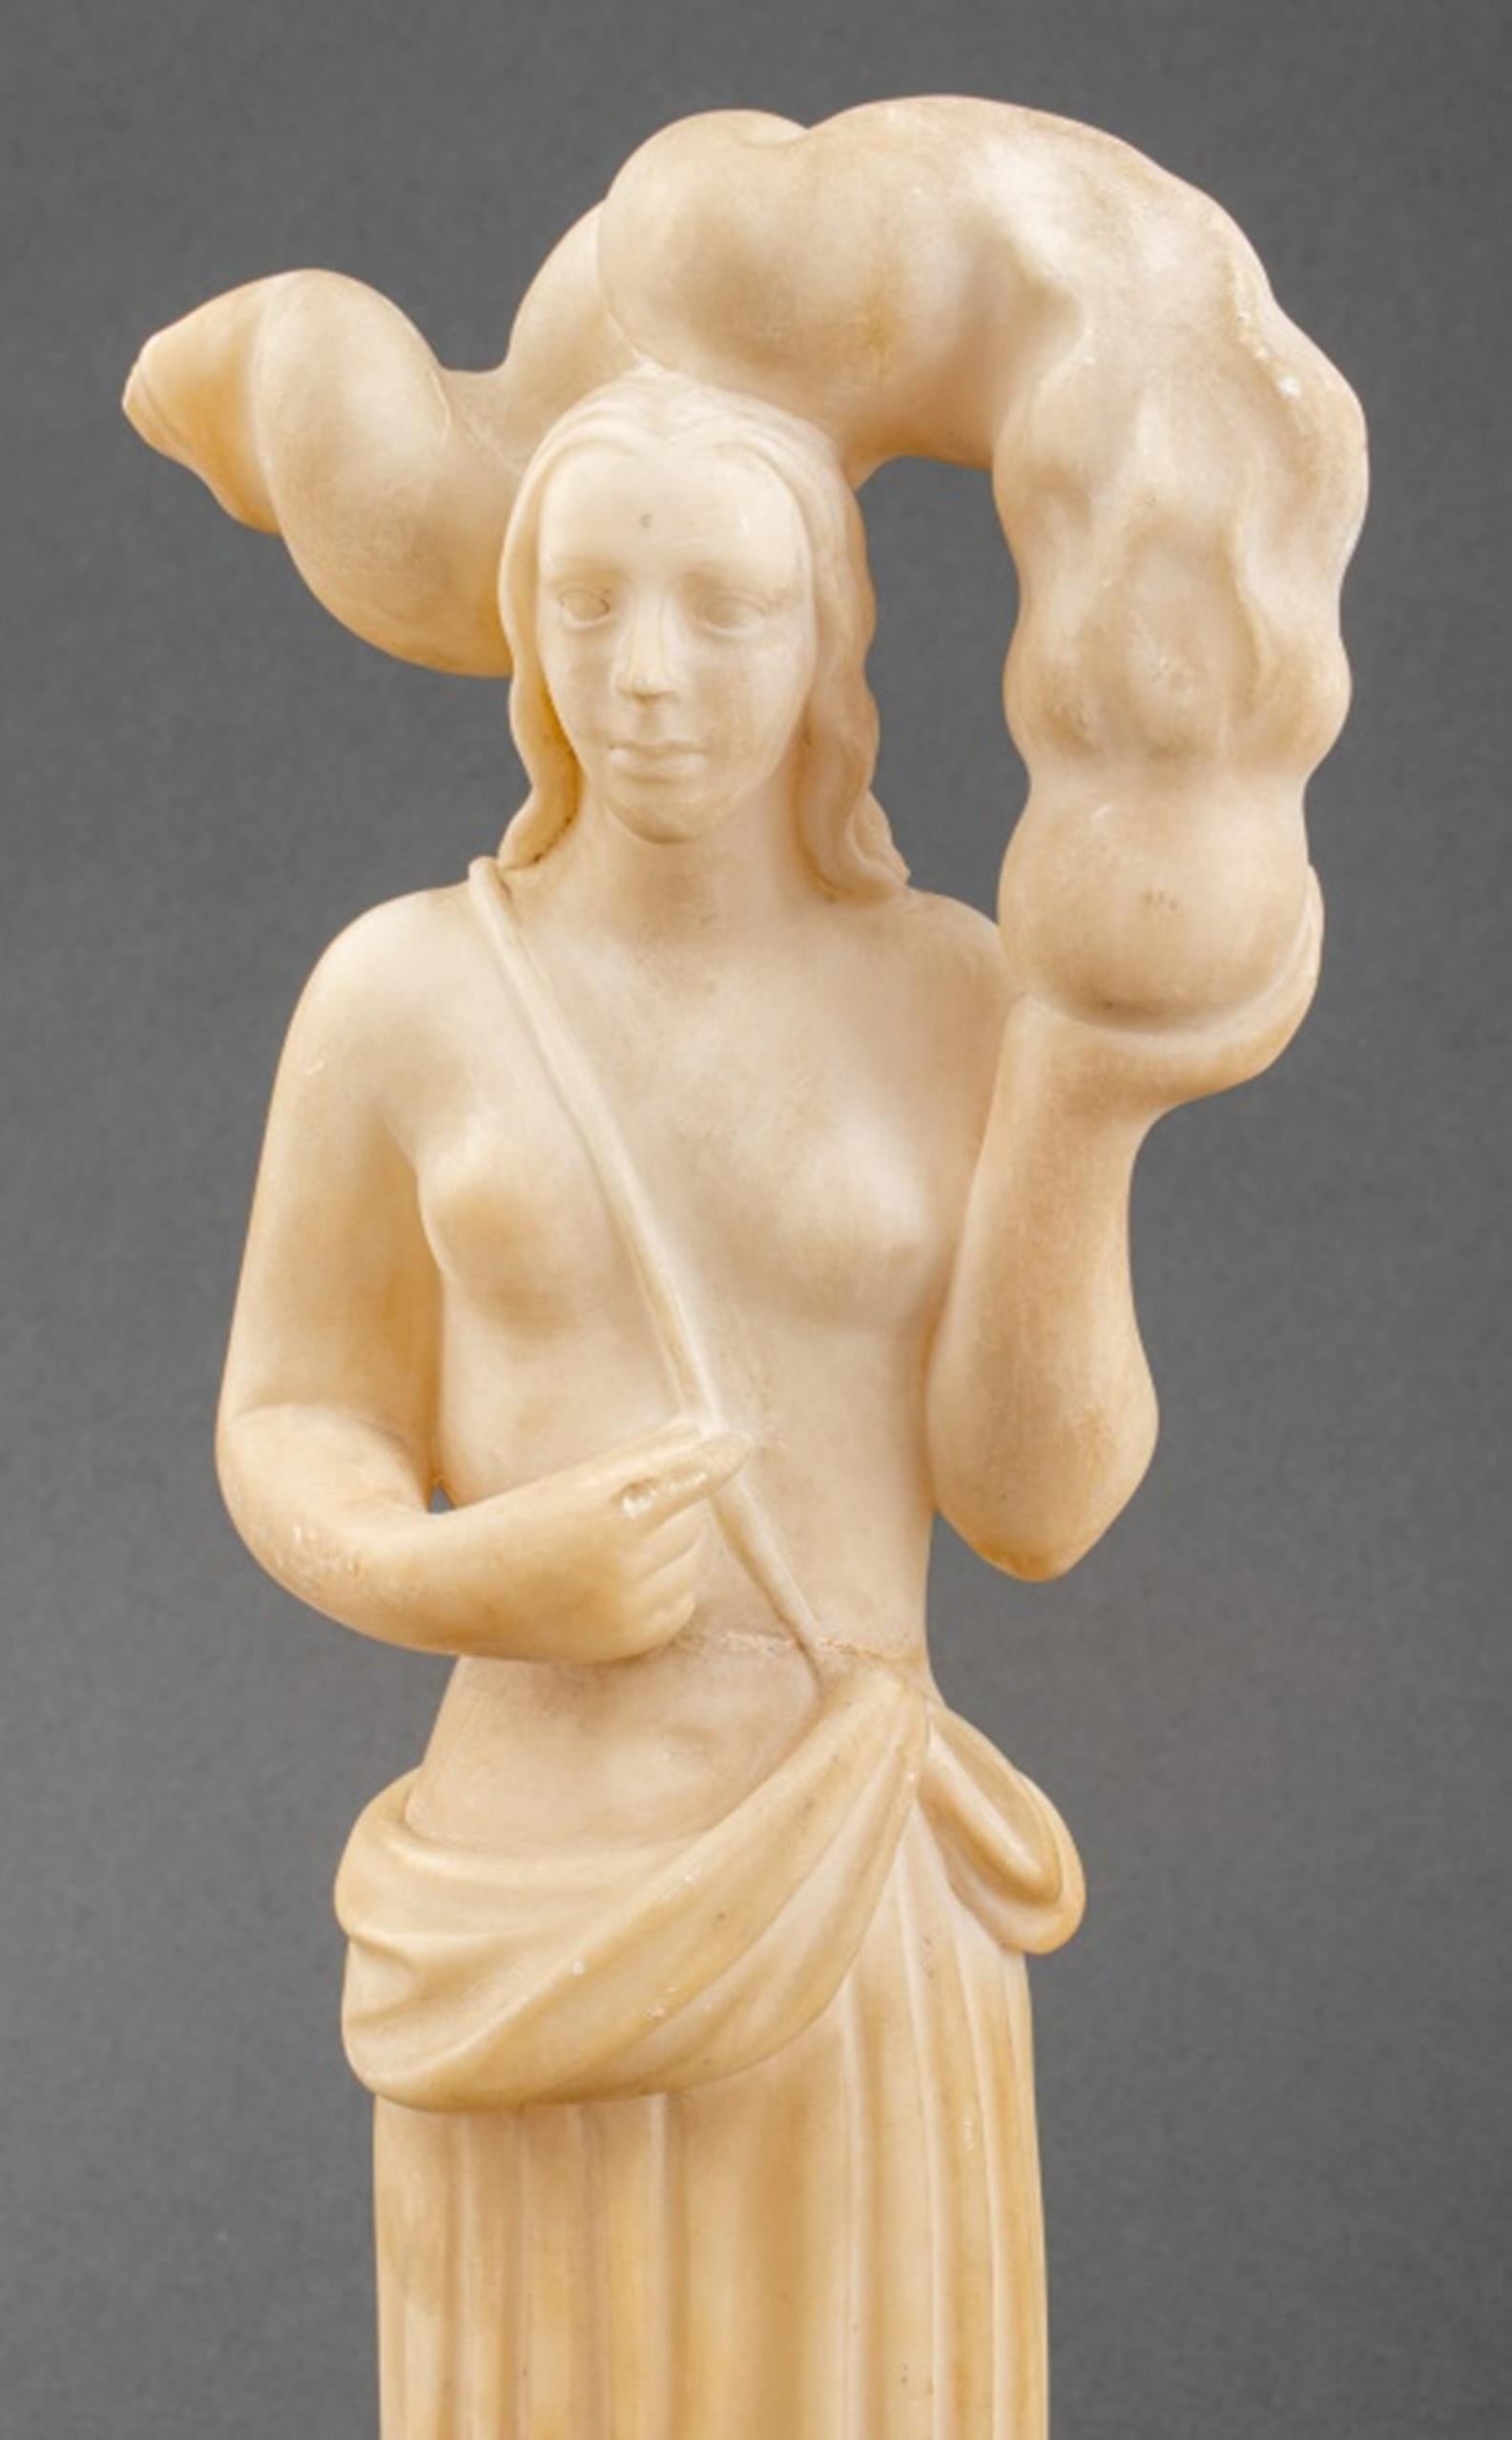 French Art Deco alabaster stone sculpture depicting a standing half-nude woman holding a vessel aflame, mounted upon a square marble base.

Dimensions: Overall: 13.5